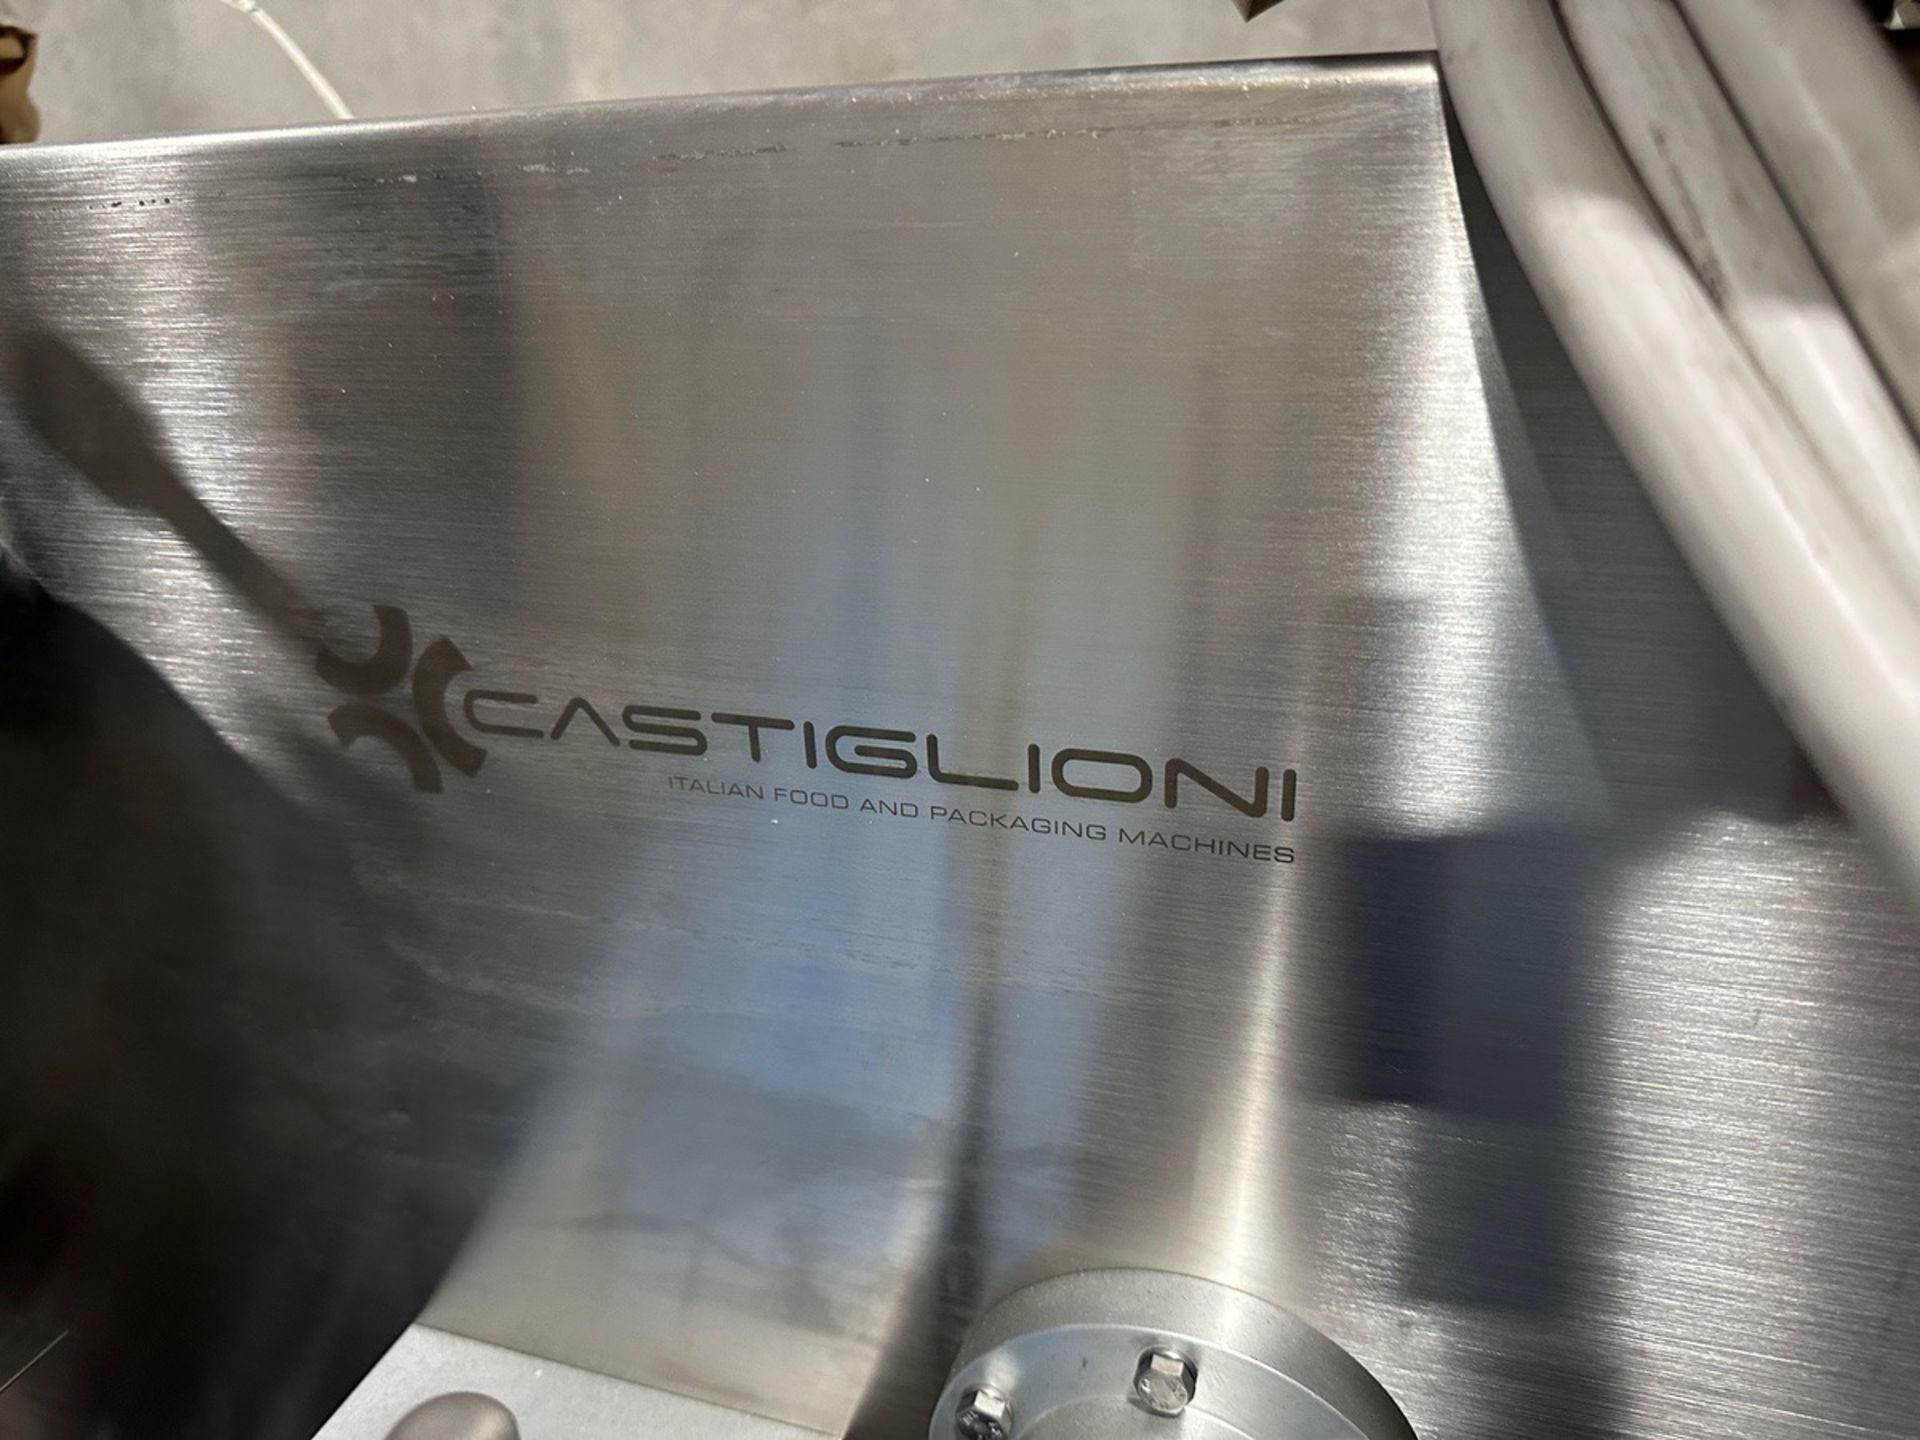 (2022 Never Used) Castiglioni Complete Stainless Steel Ravioli Line with Hoppers, Model S 80 R - Image 11 of 17